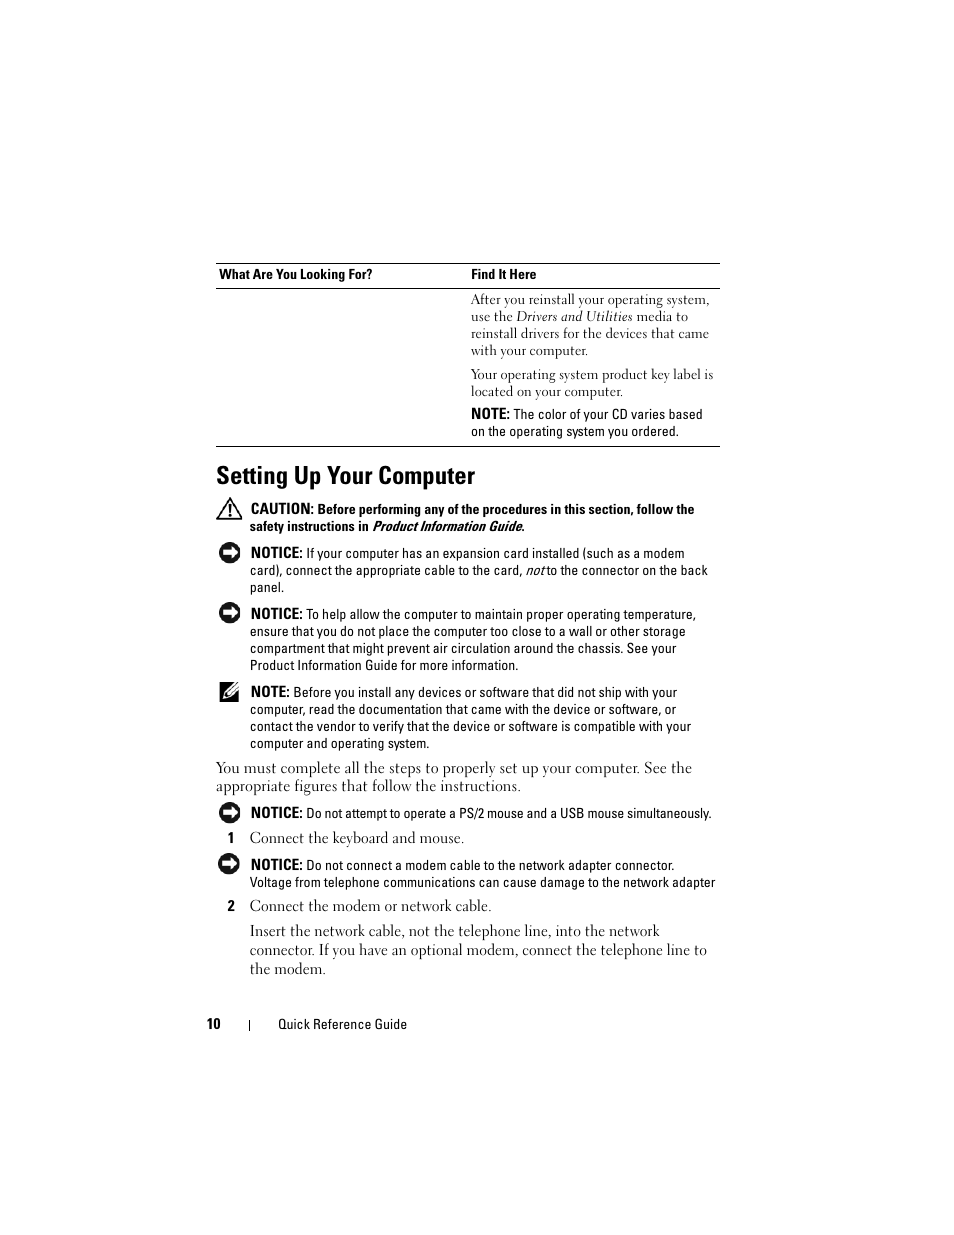 Setting up your computer | Dell OptiPlex 755 User Manual | Page 10 / 528